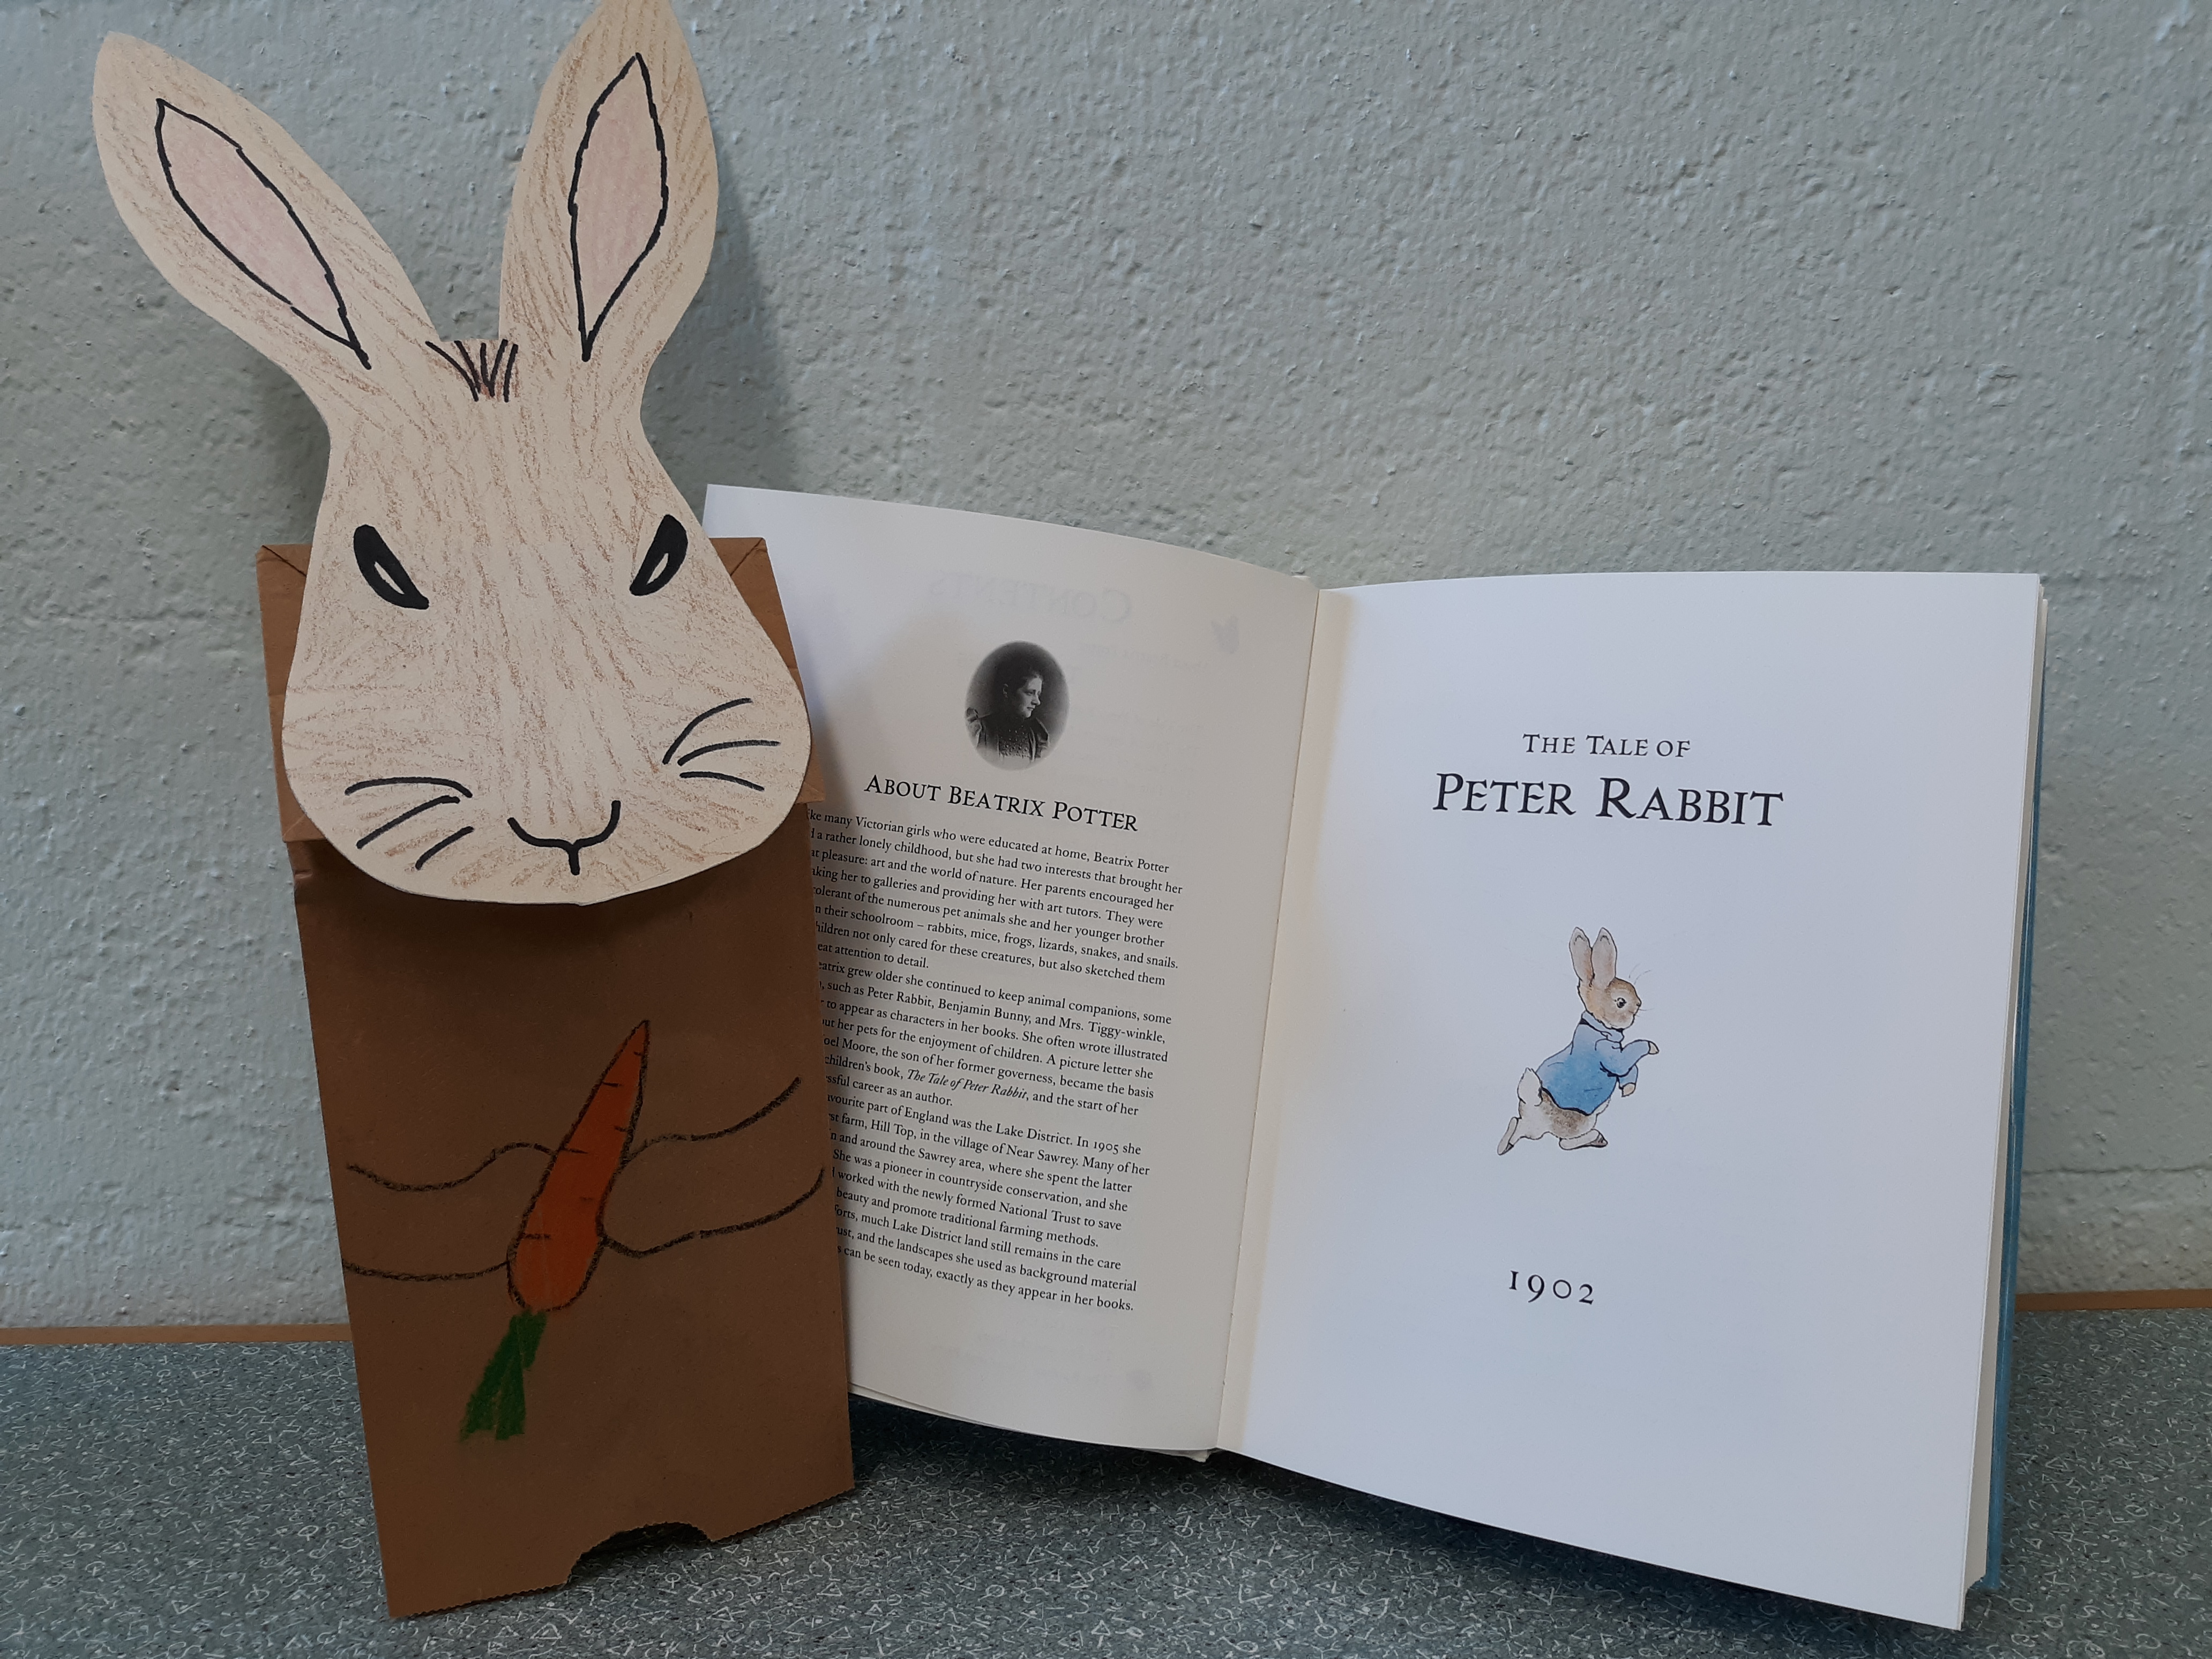 Peter Rabbit sack puppet reading The Tale of Peter Rabbit by Beatrix Potter.